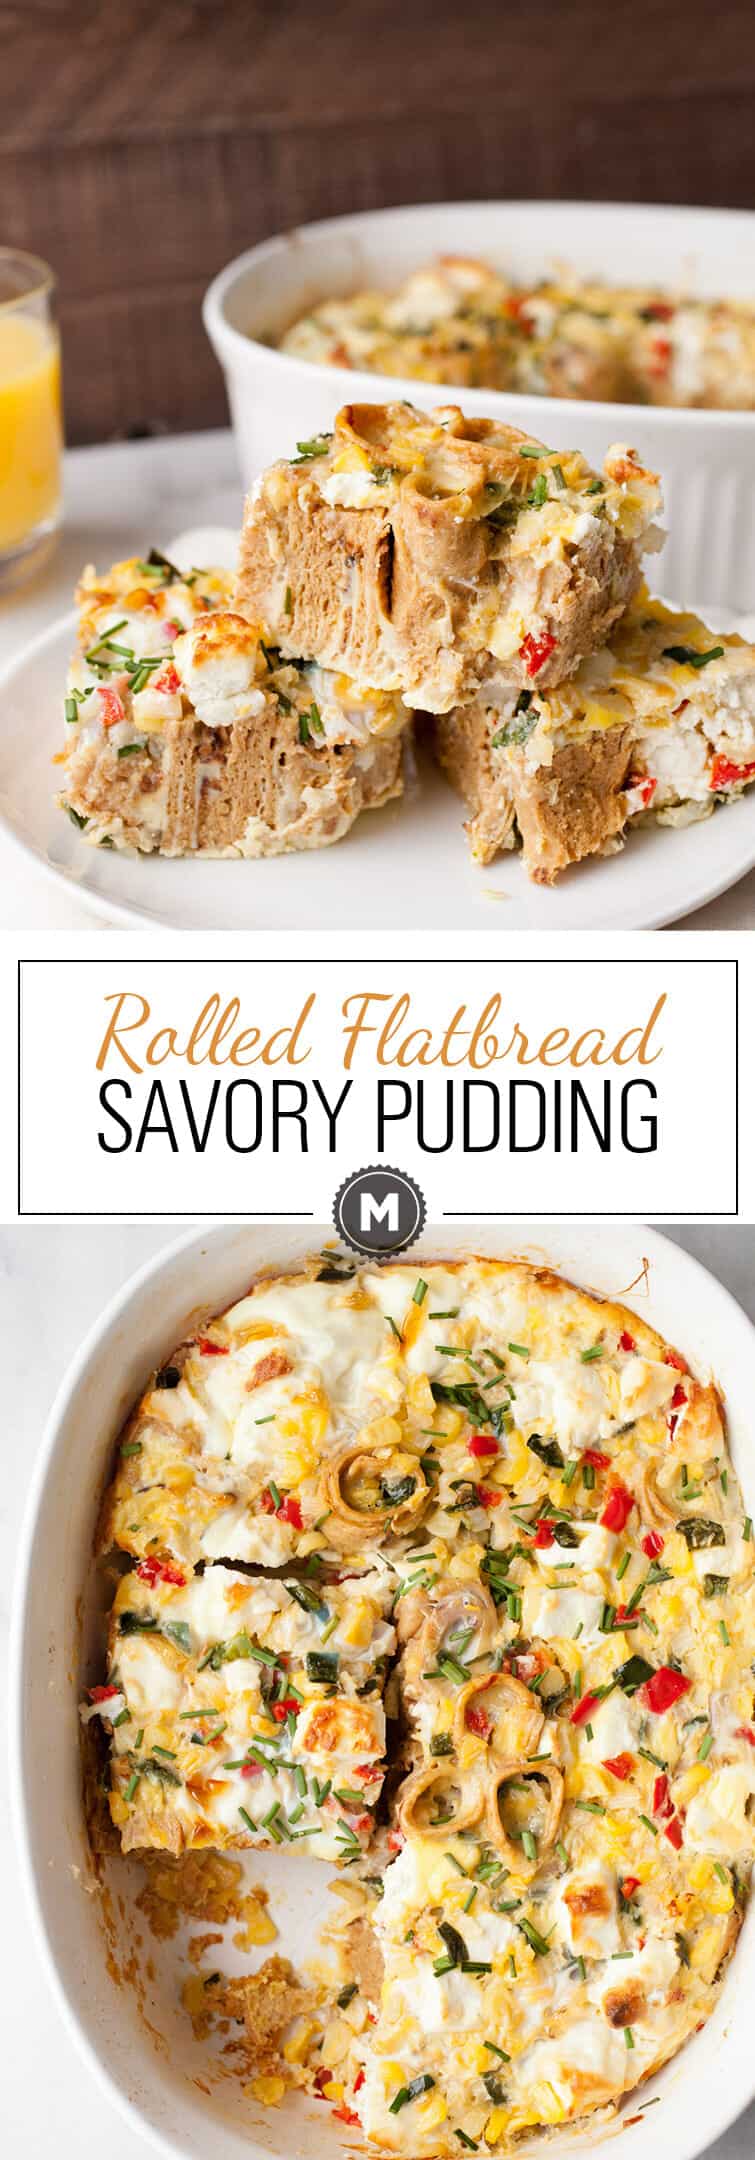 Flatbread Savory Pudding: A perfect, puffy savory pudding made with rolled flatbread chunks, fresh sweet corn, peppers, and big dollops of goat cheese. Perfect for any meal! #sponsored | macheesmo.com